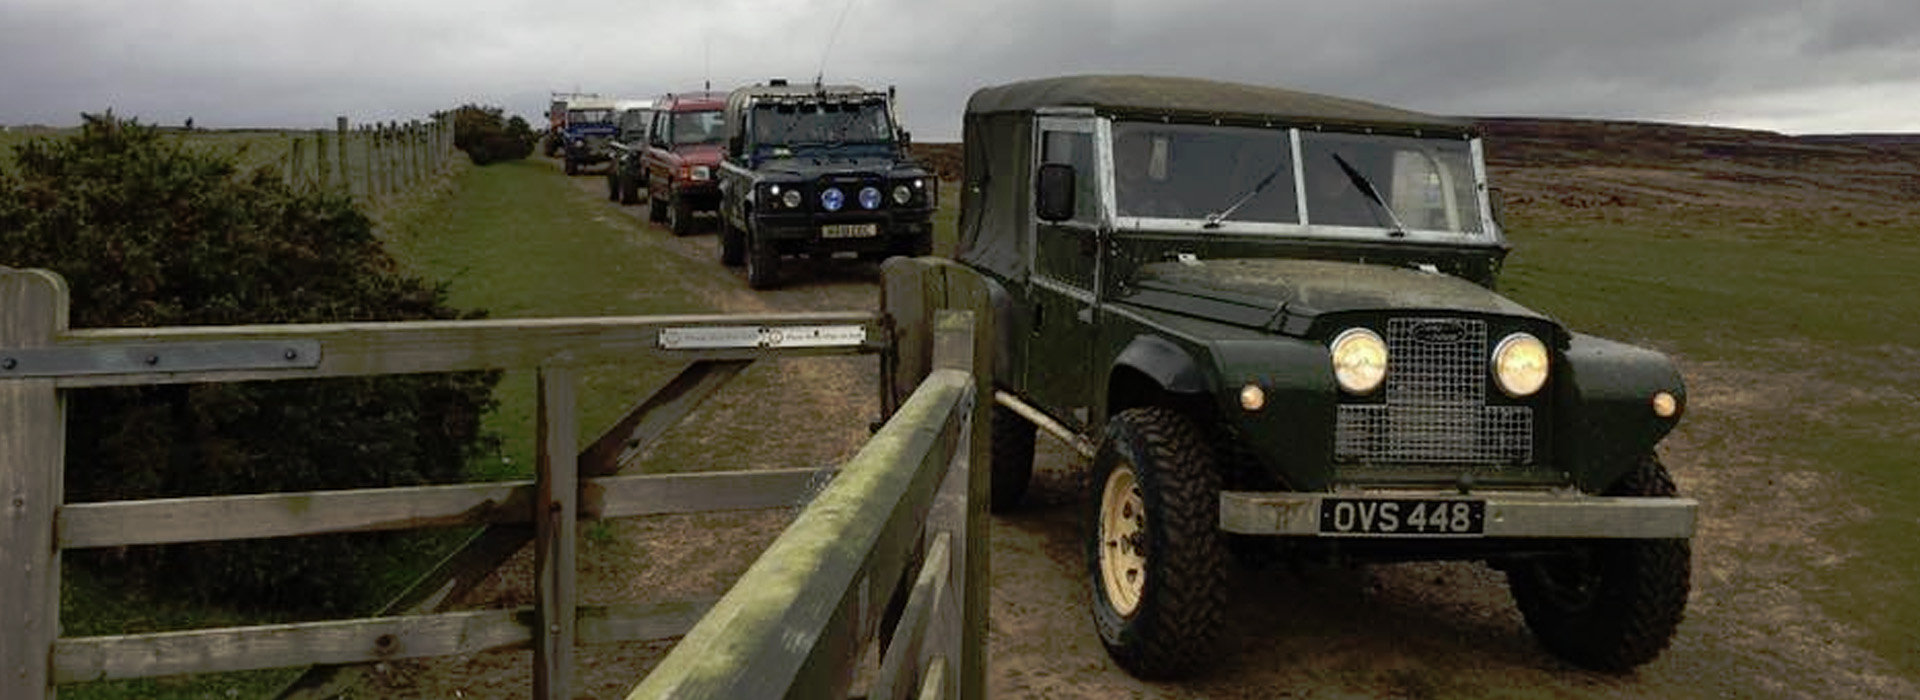 LAND ROVER OWNERS CLUB